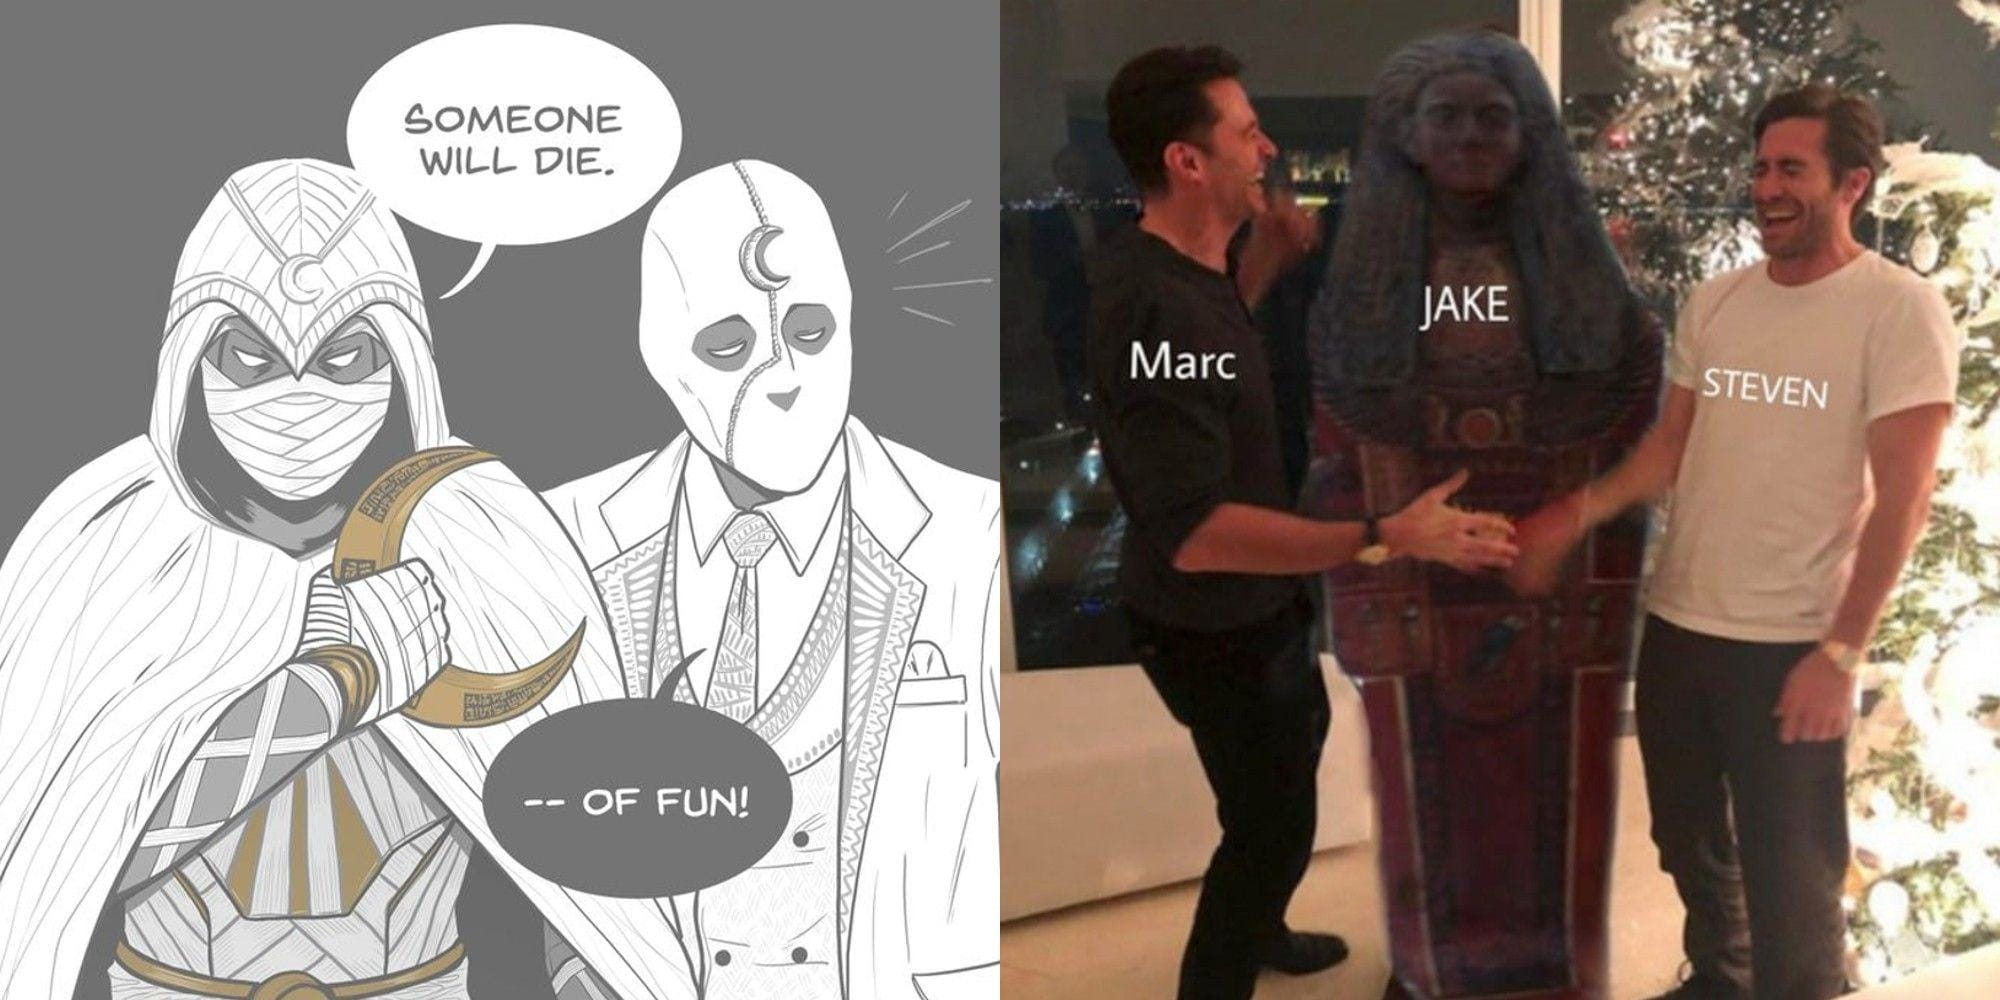 Split image of Moon Knight and Mr. Knight meme and Marc, Steven, and Jake meme